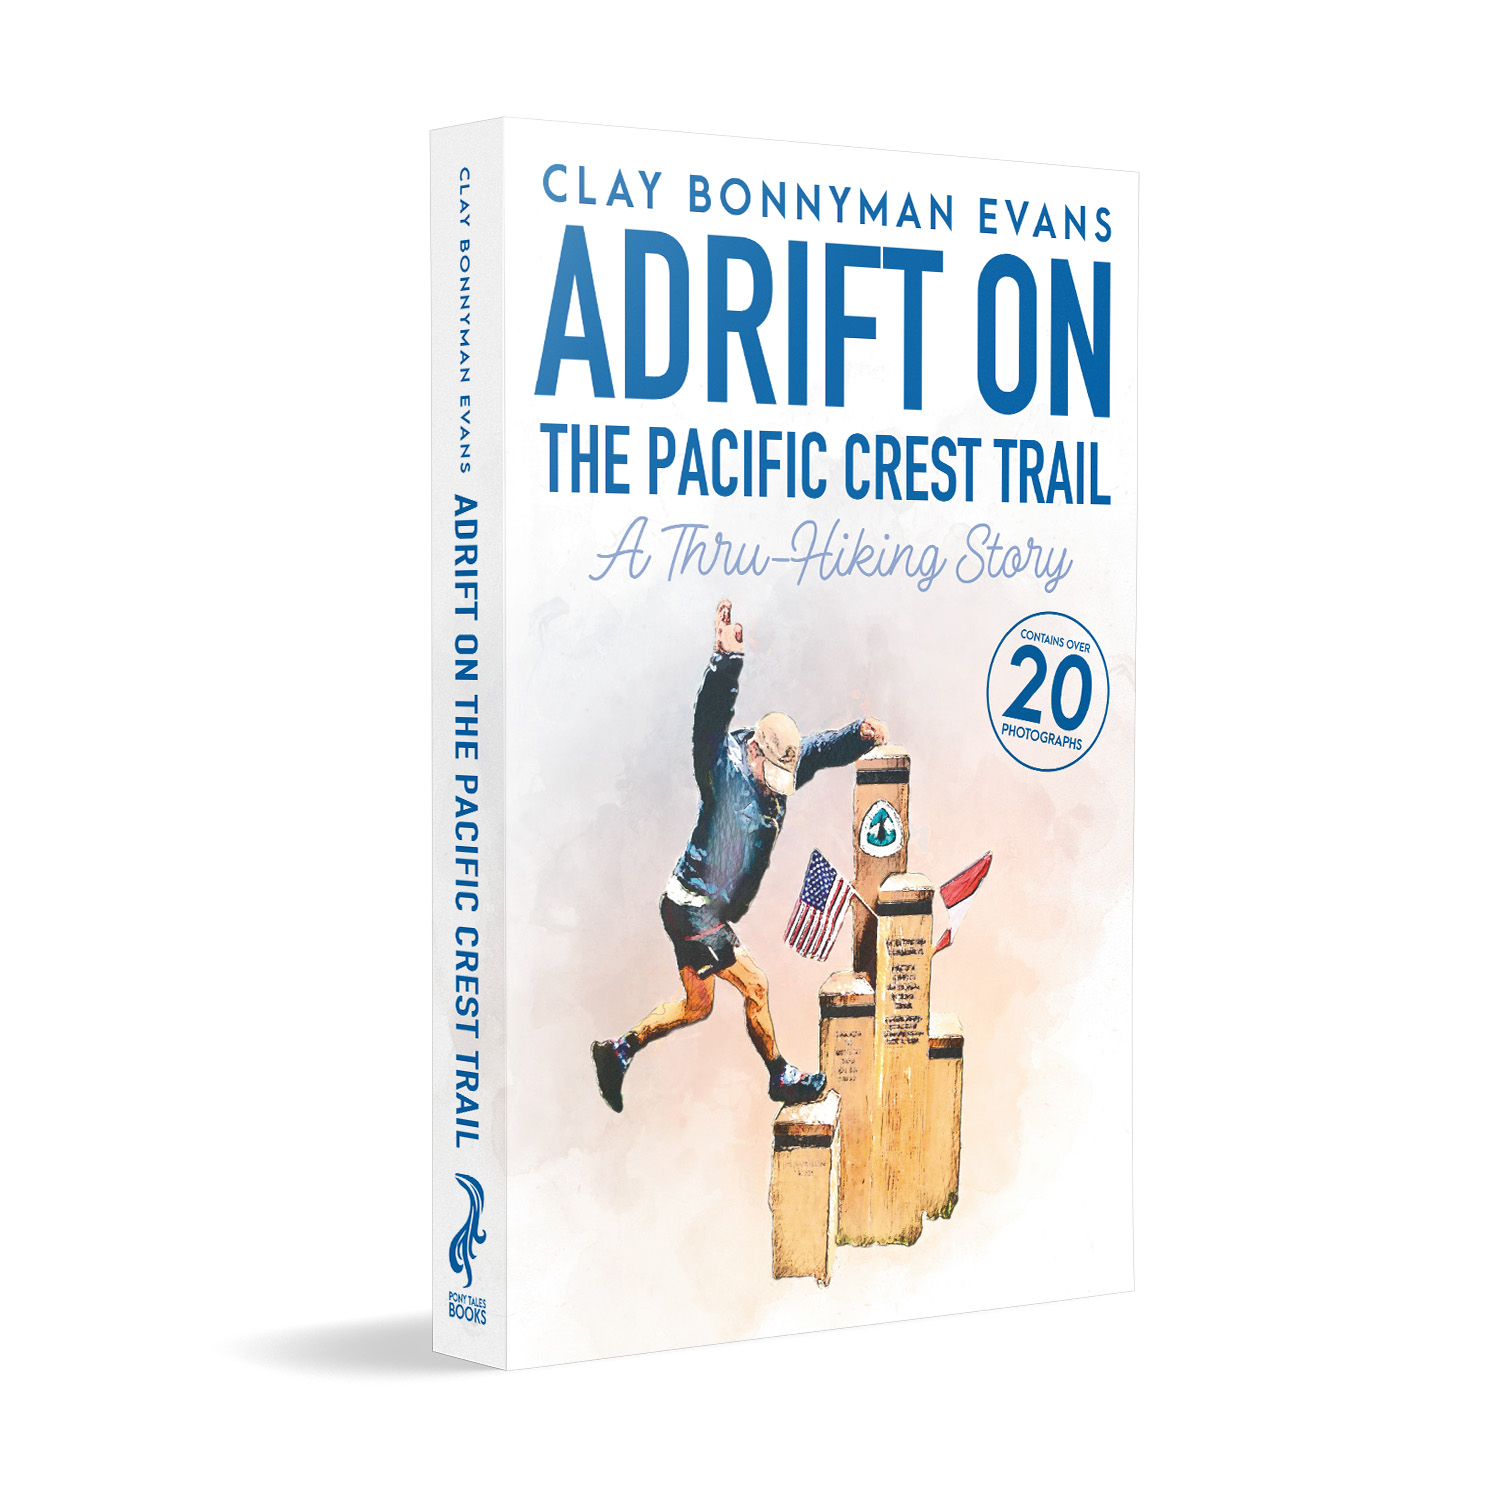 'Adrift On The Pacific Crest Trail' is a joyous, life-affirming thru-hiking memoir. The author is Clay Bonnyman Evans. The book cover design and interior formatting are by Mark Thomas. To learn more about what Mark could do for your book, please visit coverness.com.